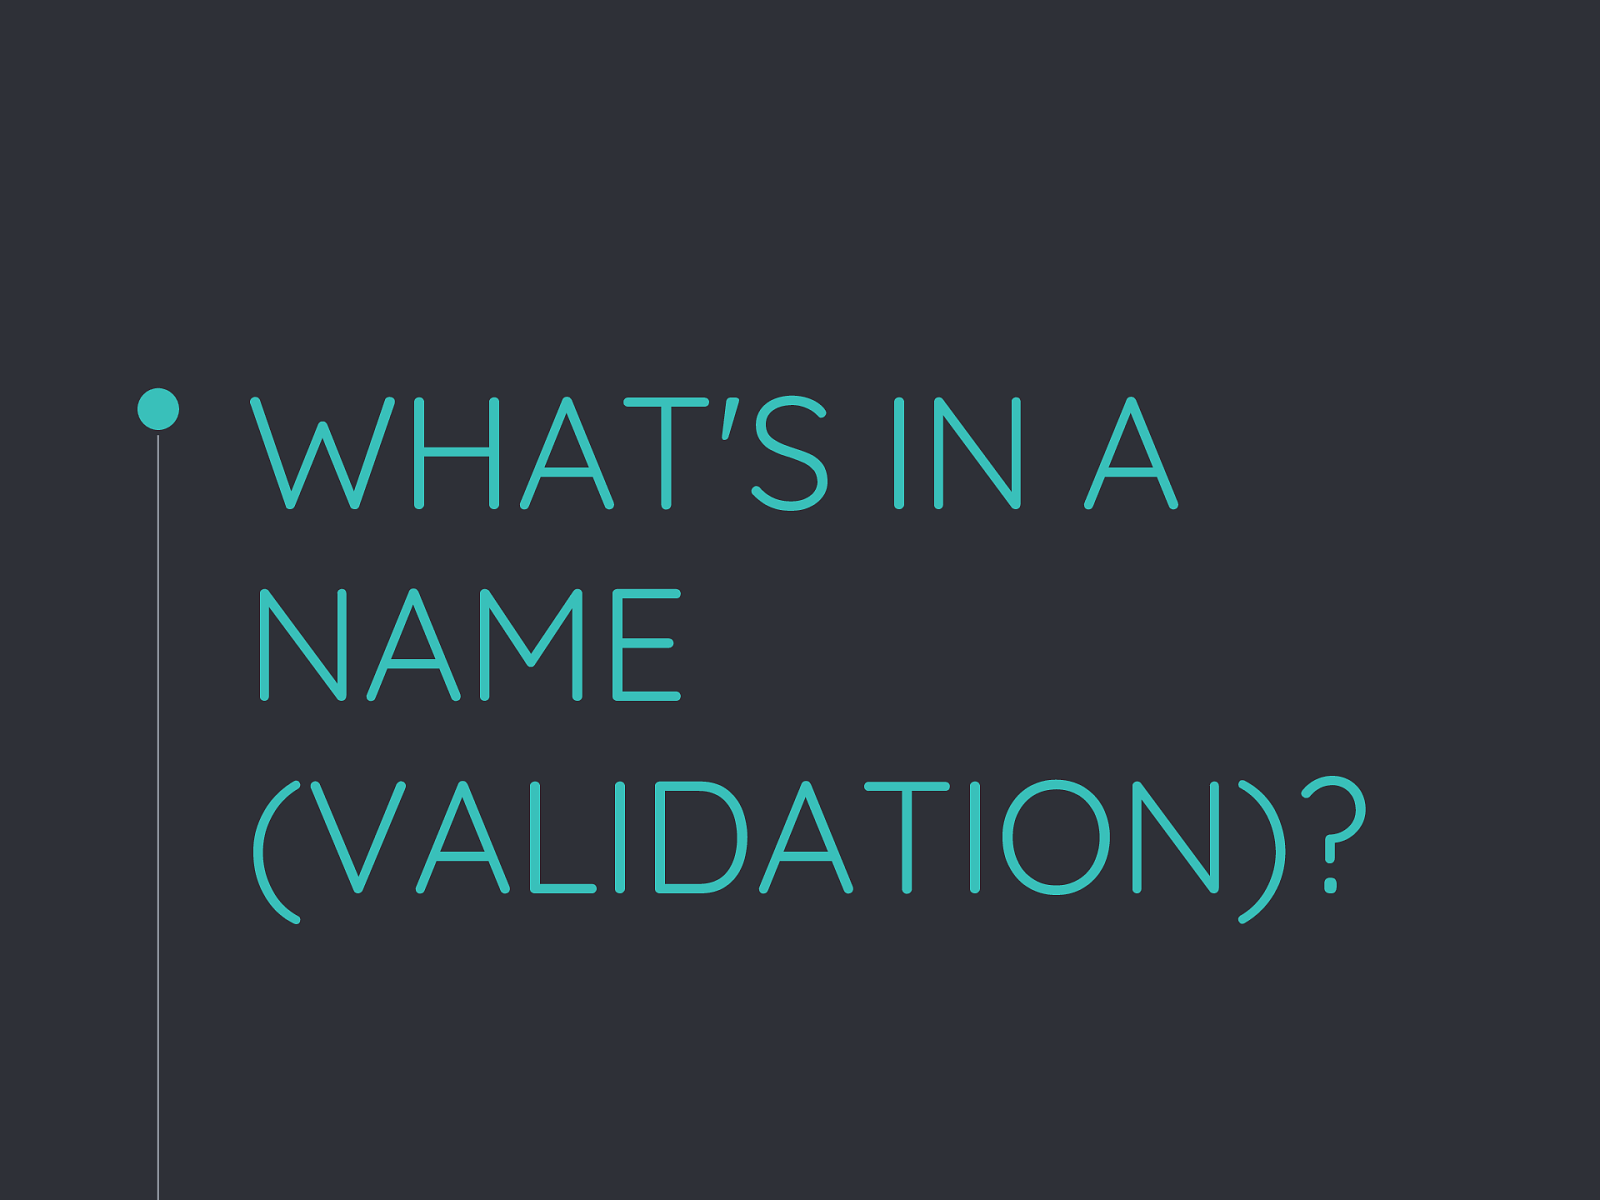 What's in a name (validation)?